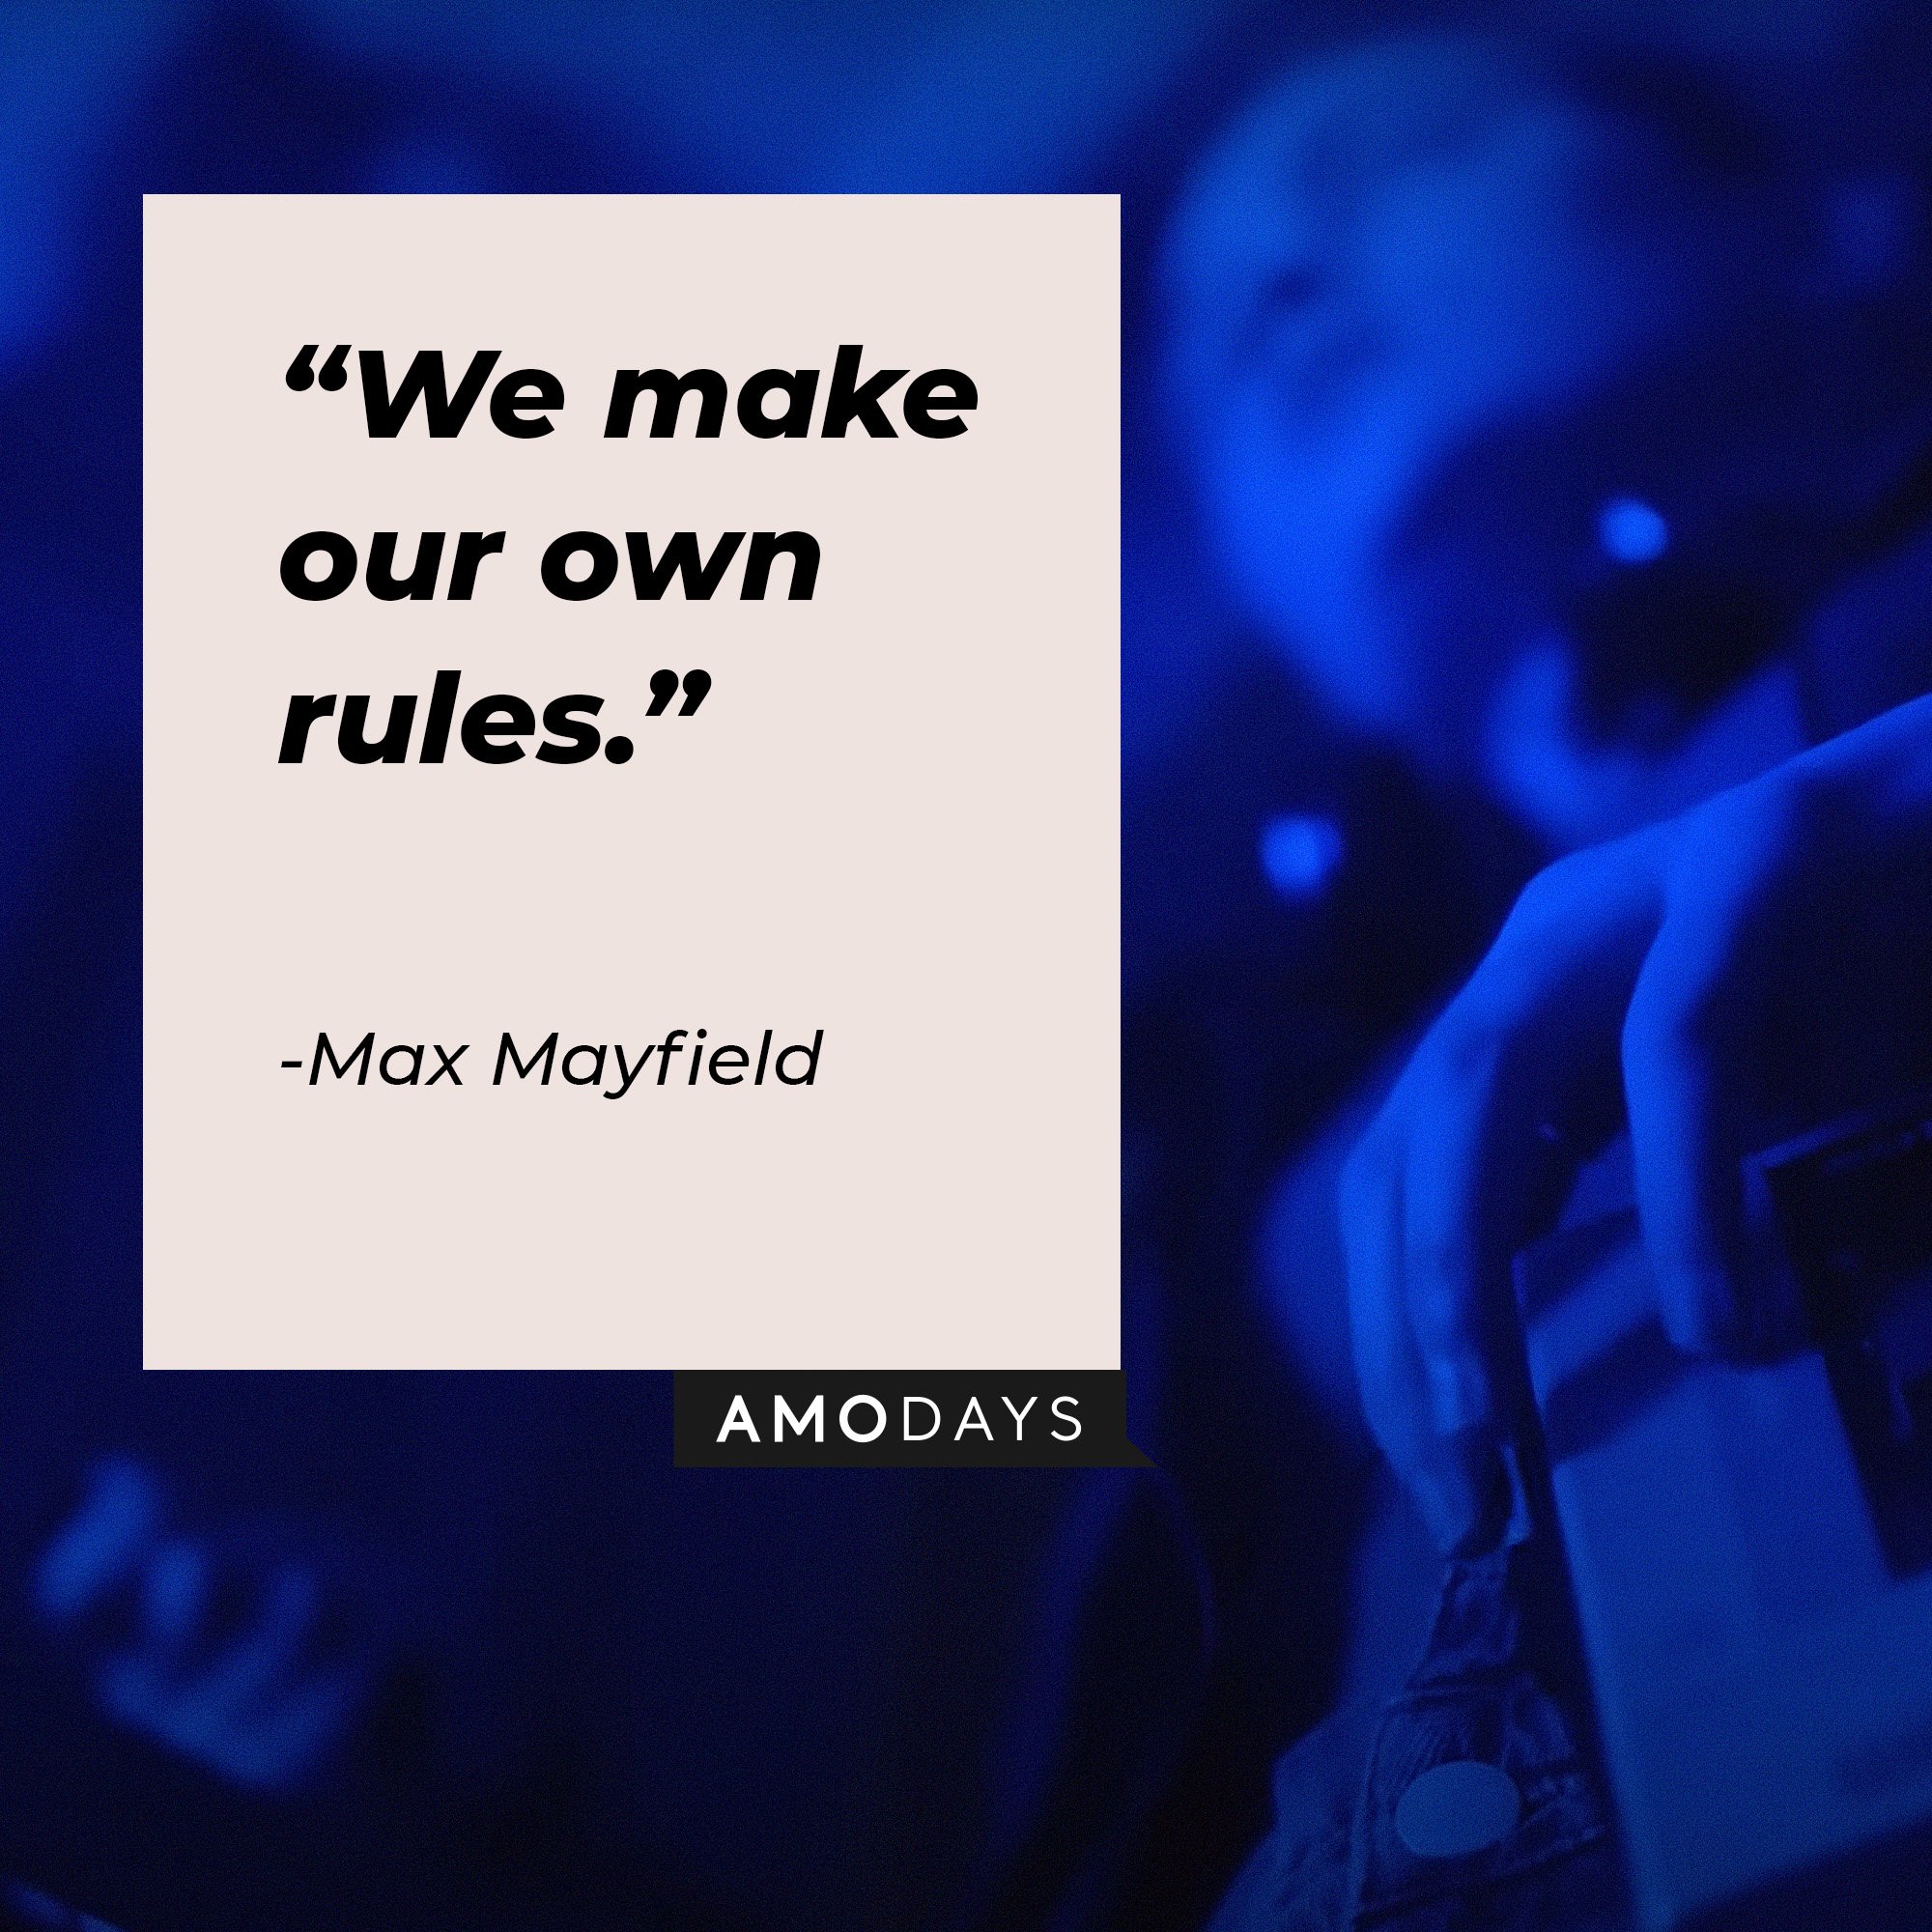 Max Mayfield’s quote: "We make our own rules." | Image: AmoDays